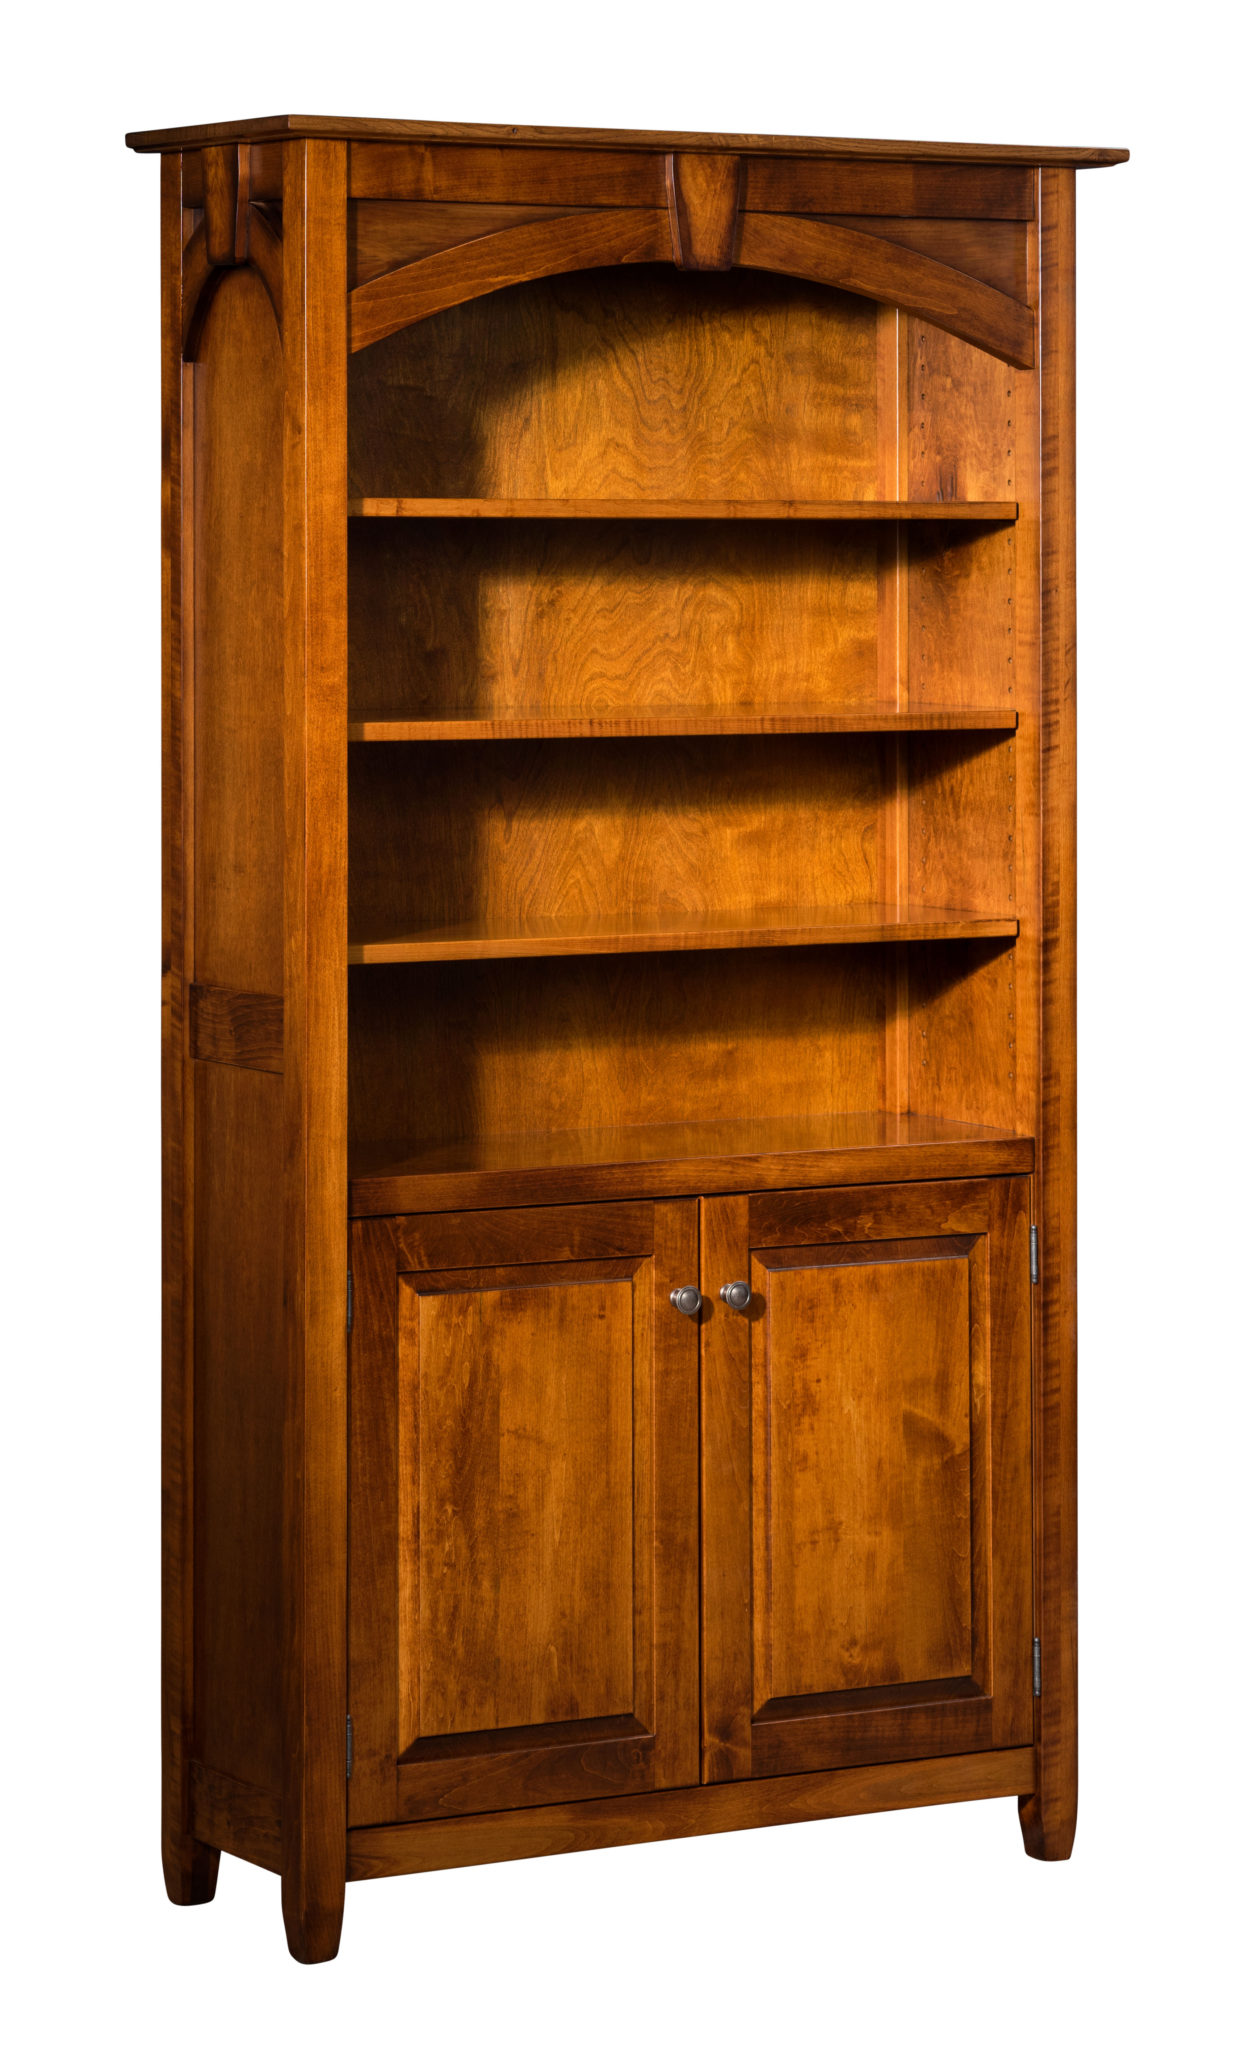 Kensing Bookcase Amish Solid Wood Bookcases Kvadro Furniture